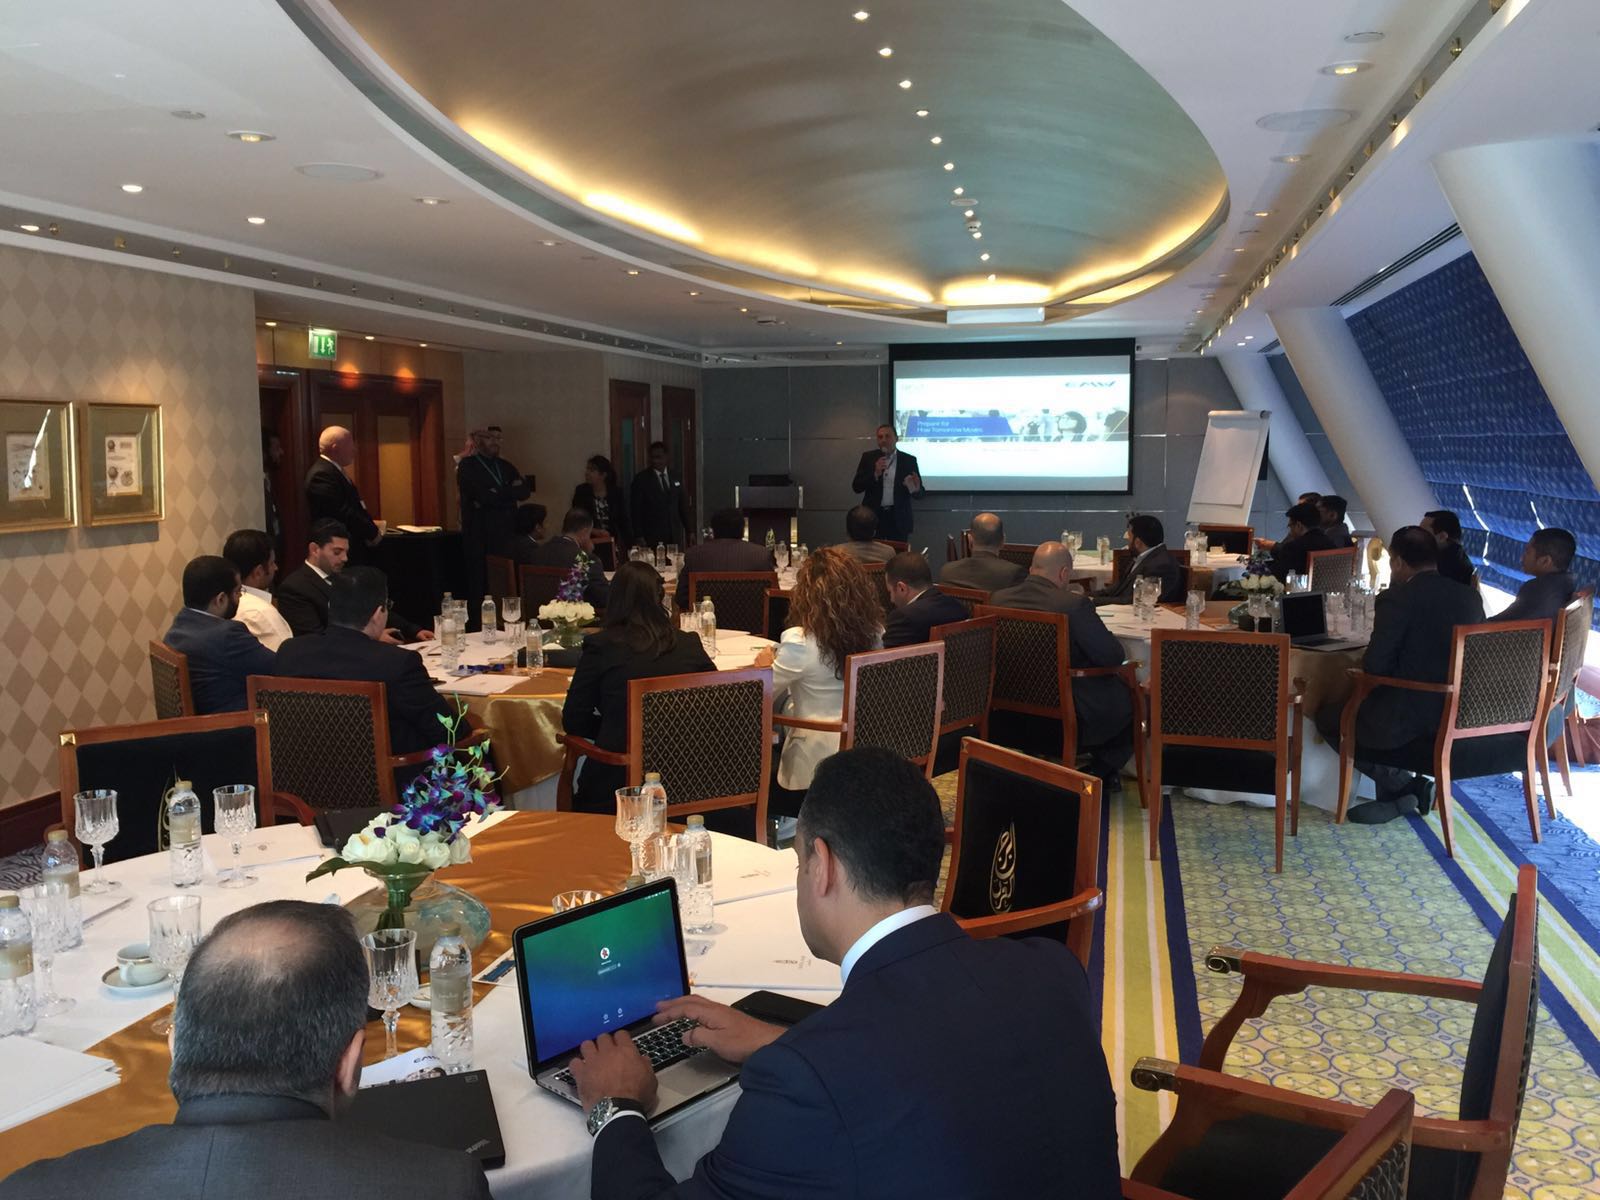 EMW and Aruba host event focused on mobility and security